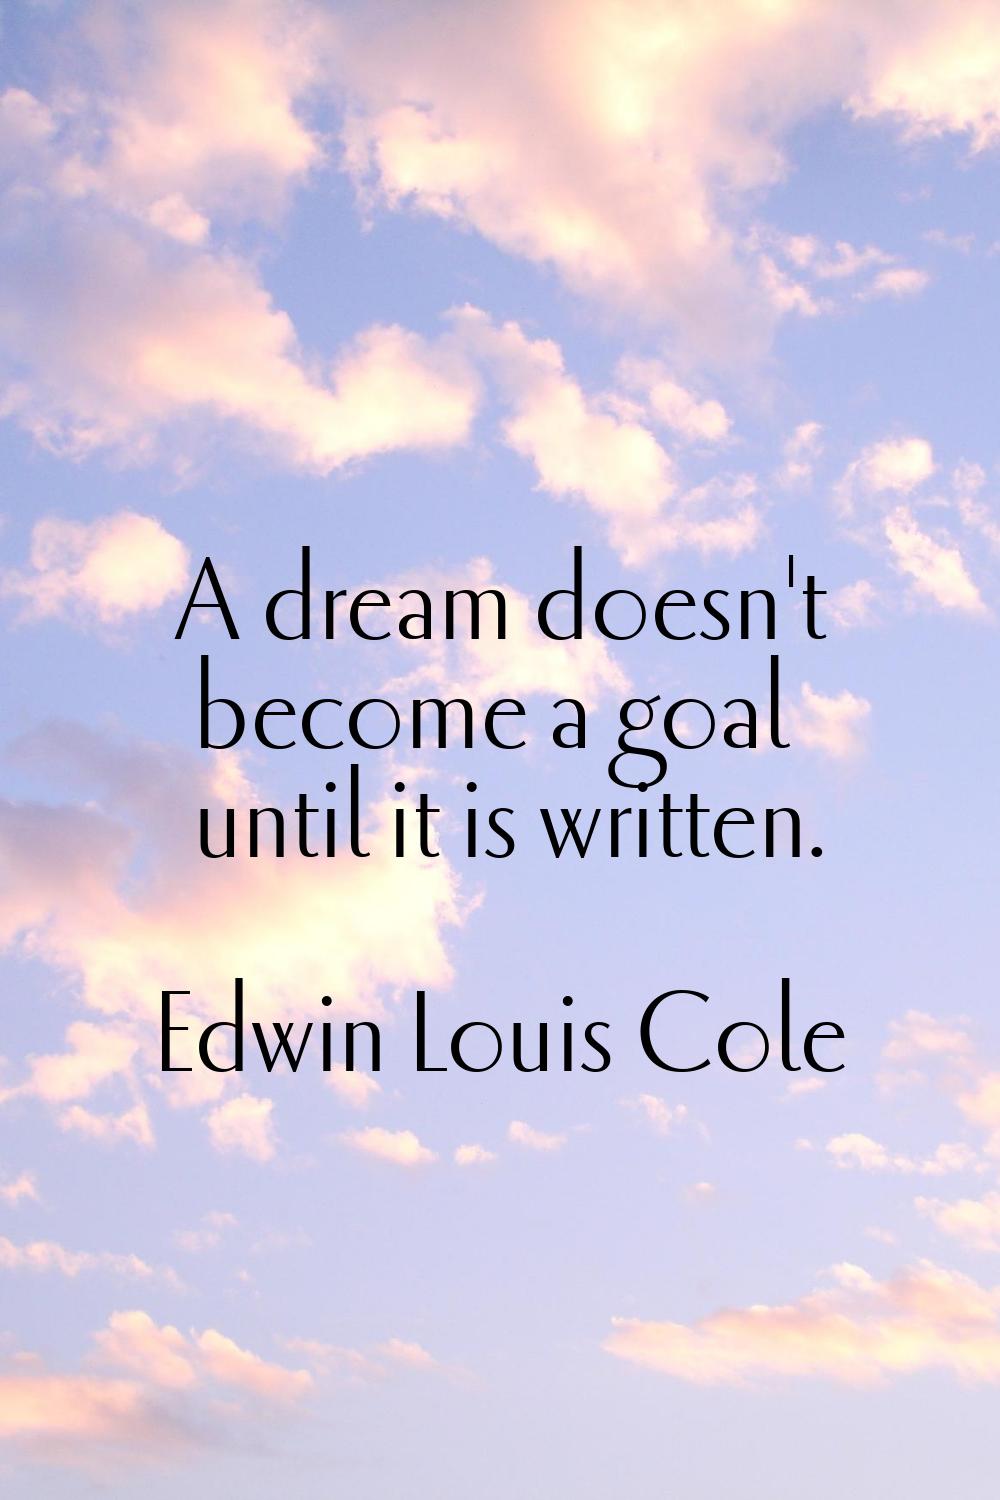 A dream doesn't become a goal until it is written.